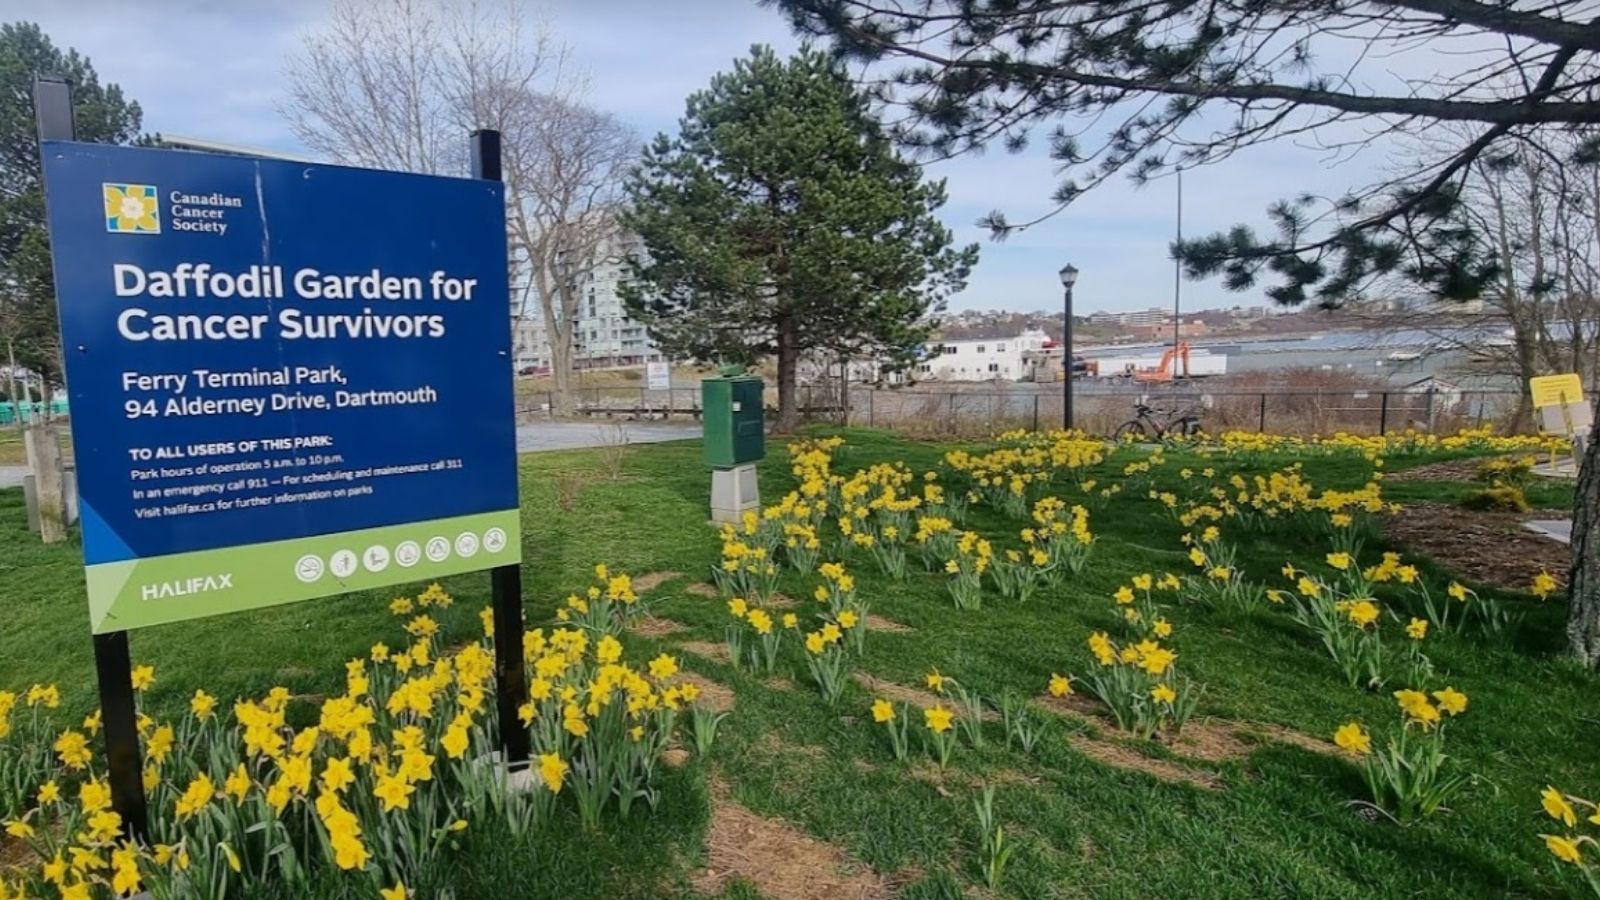 Park sign for the Daffodil Garden for Cancer Survivors with the park visible in the background